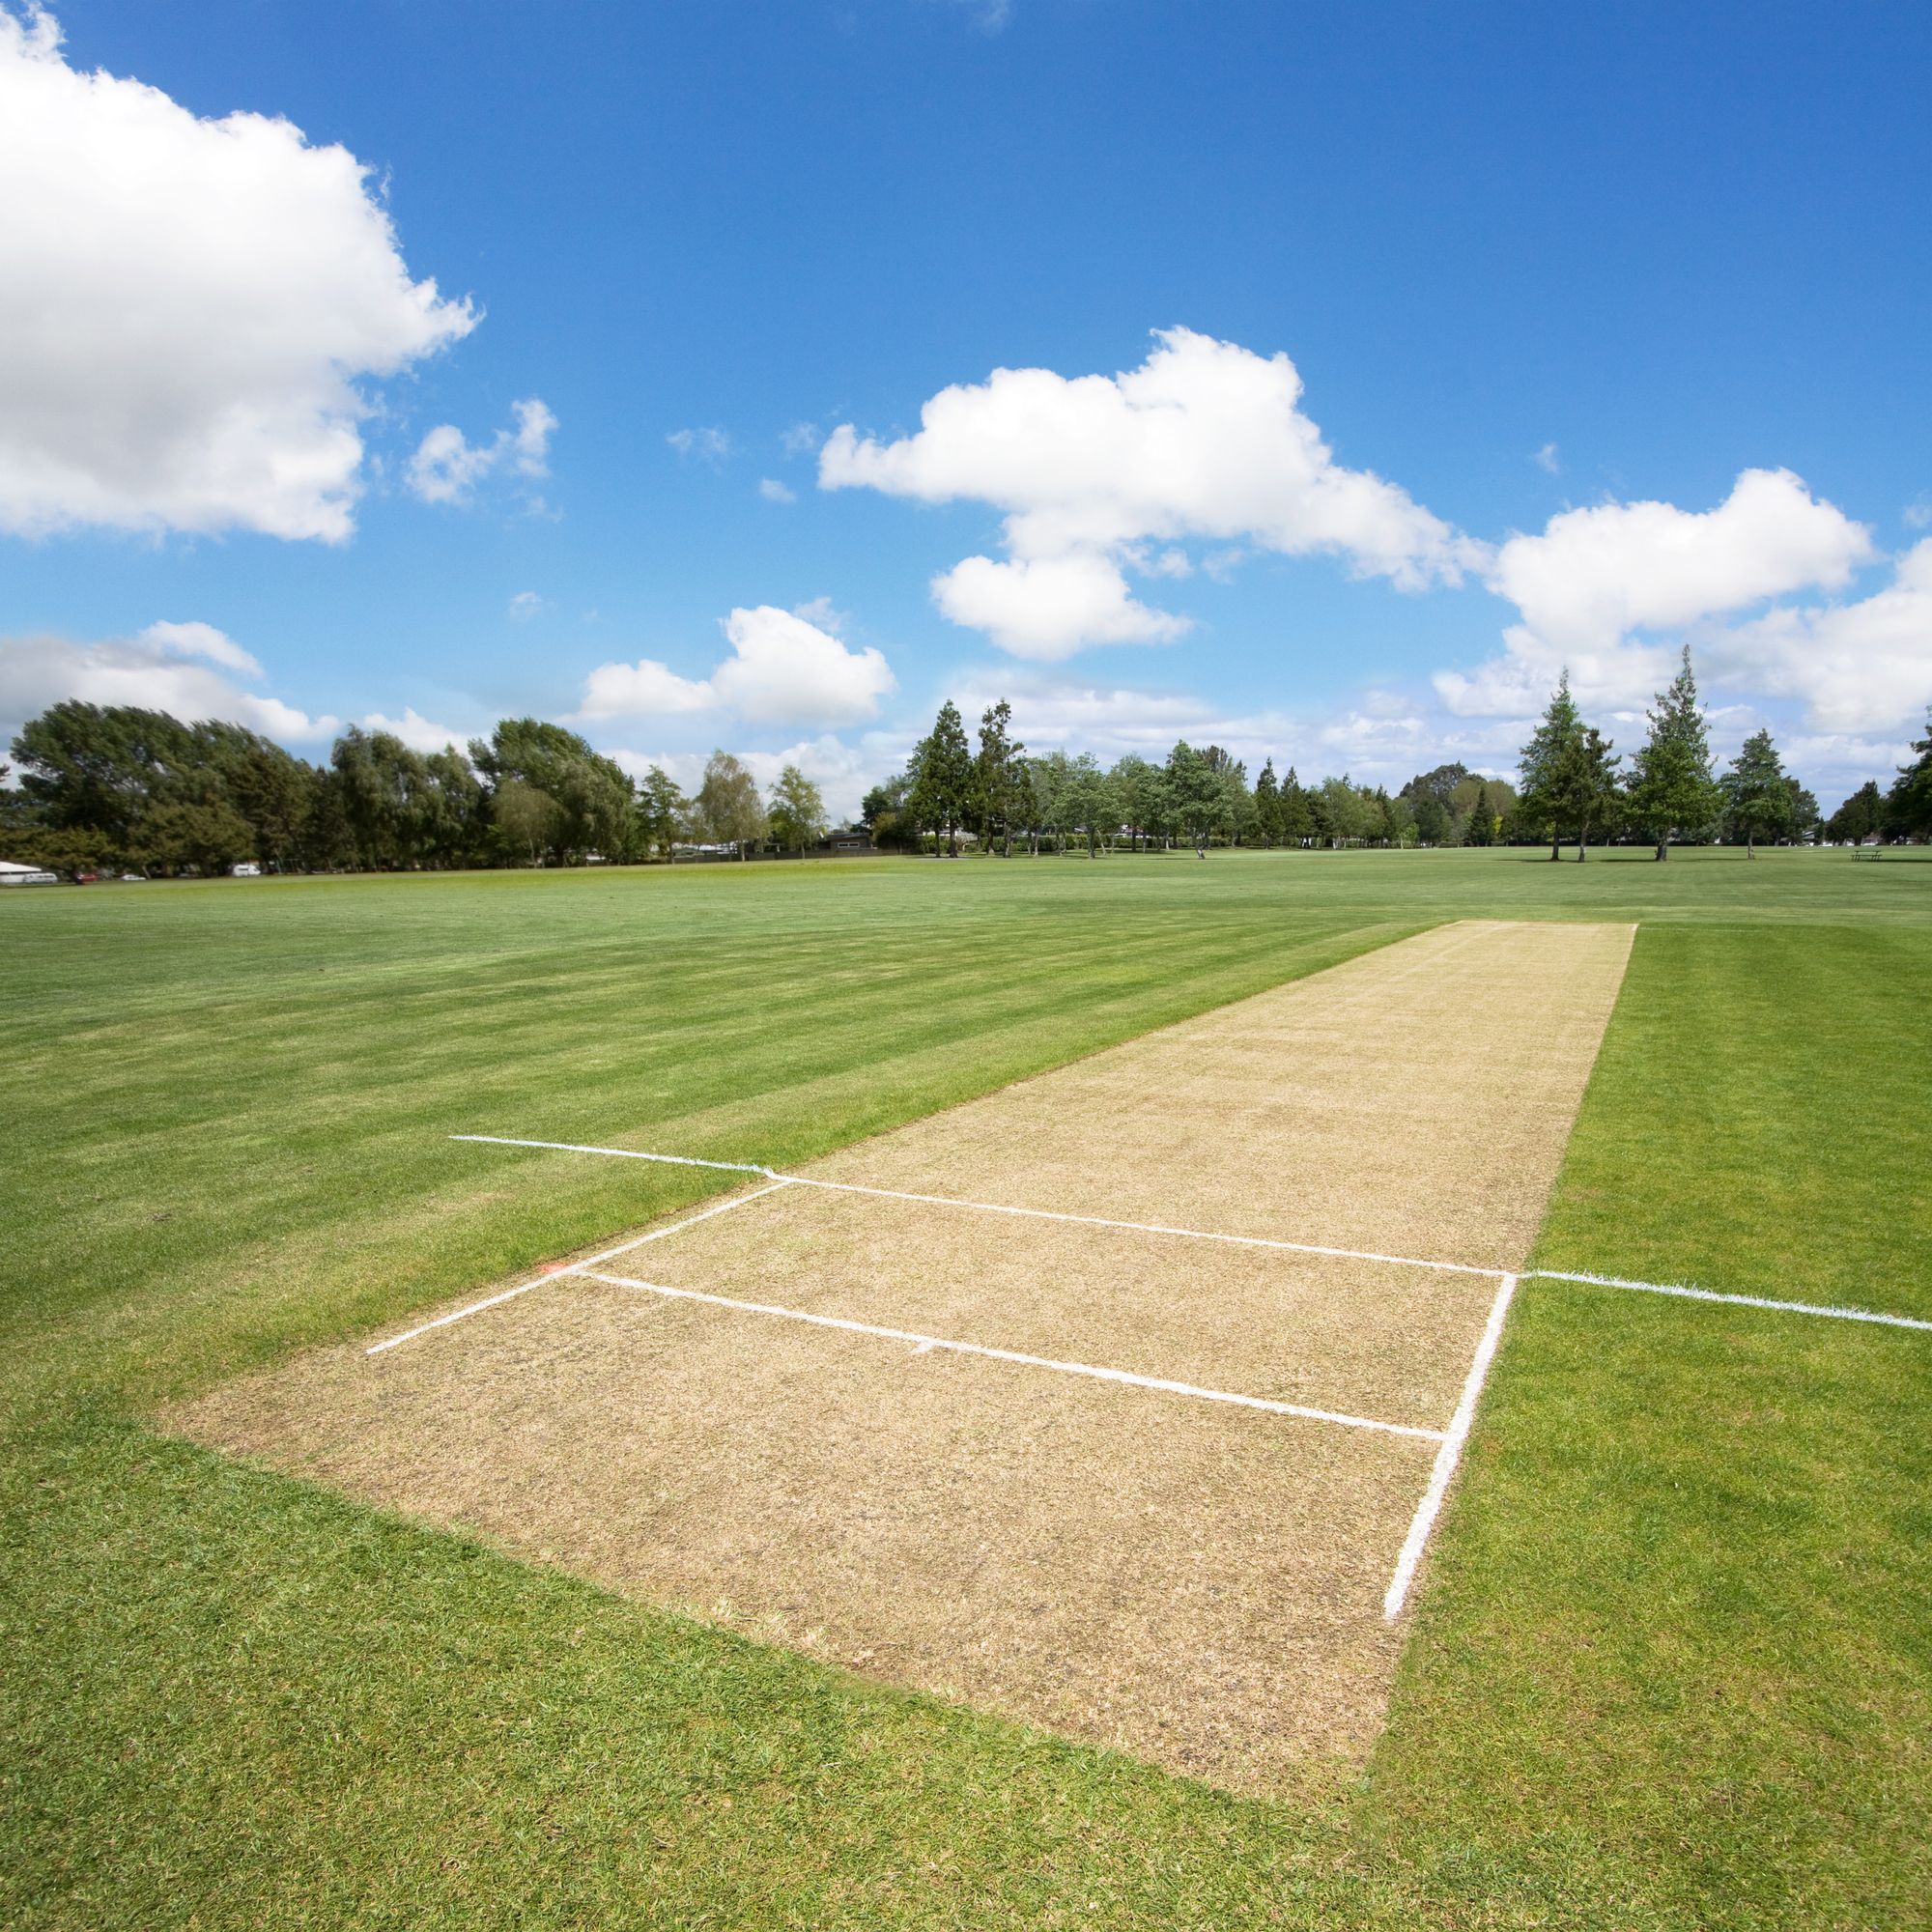 Cricket pitch in the sports park - background with copy space ...